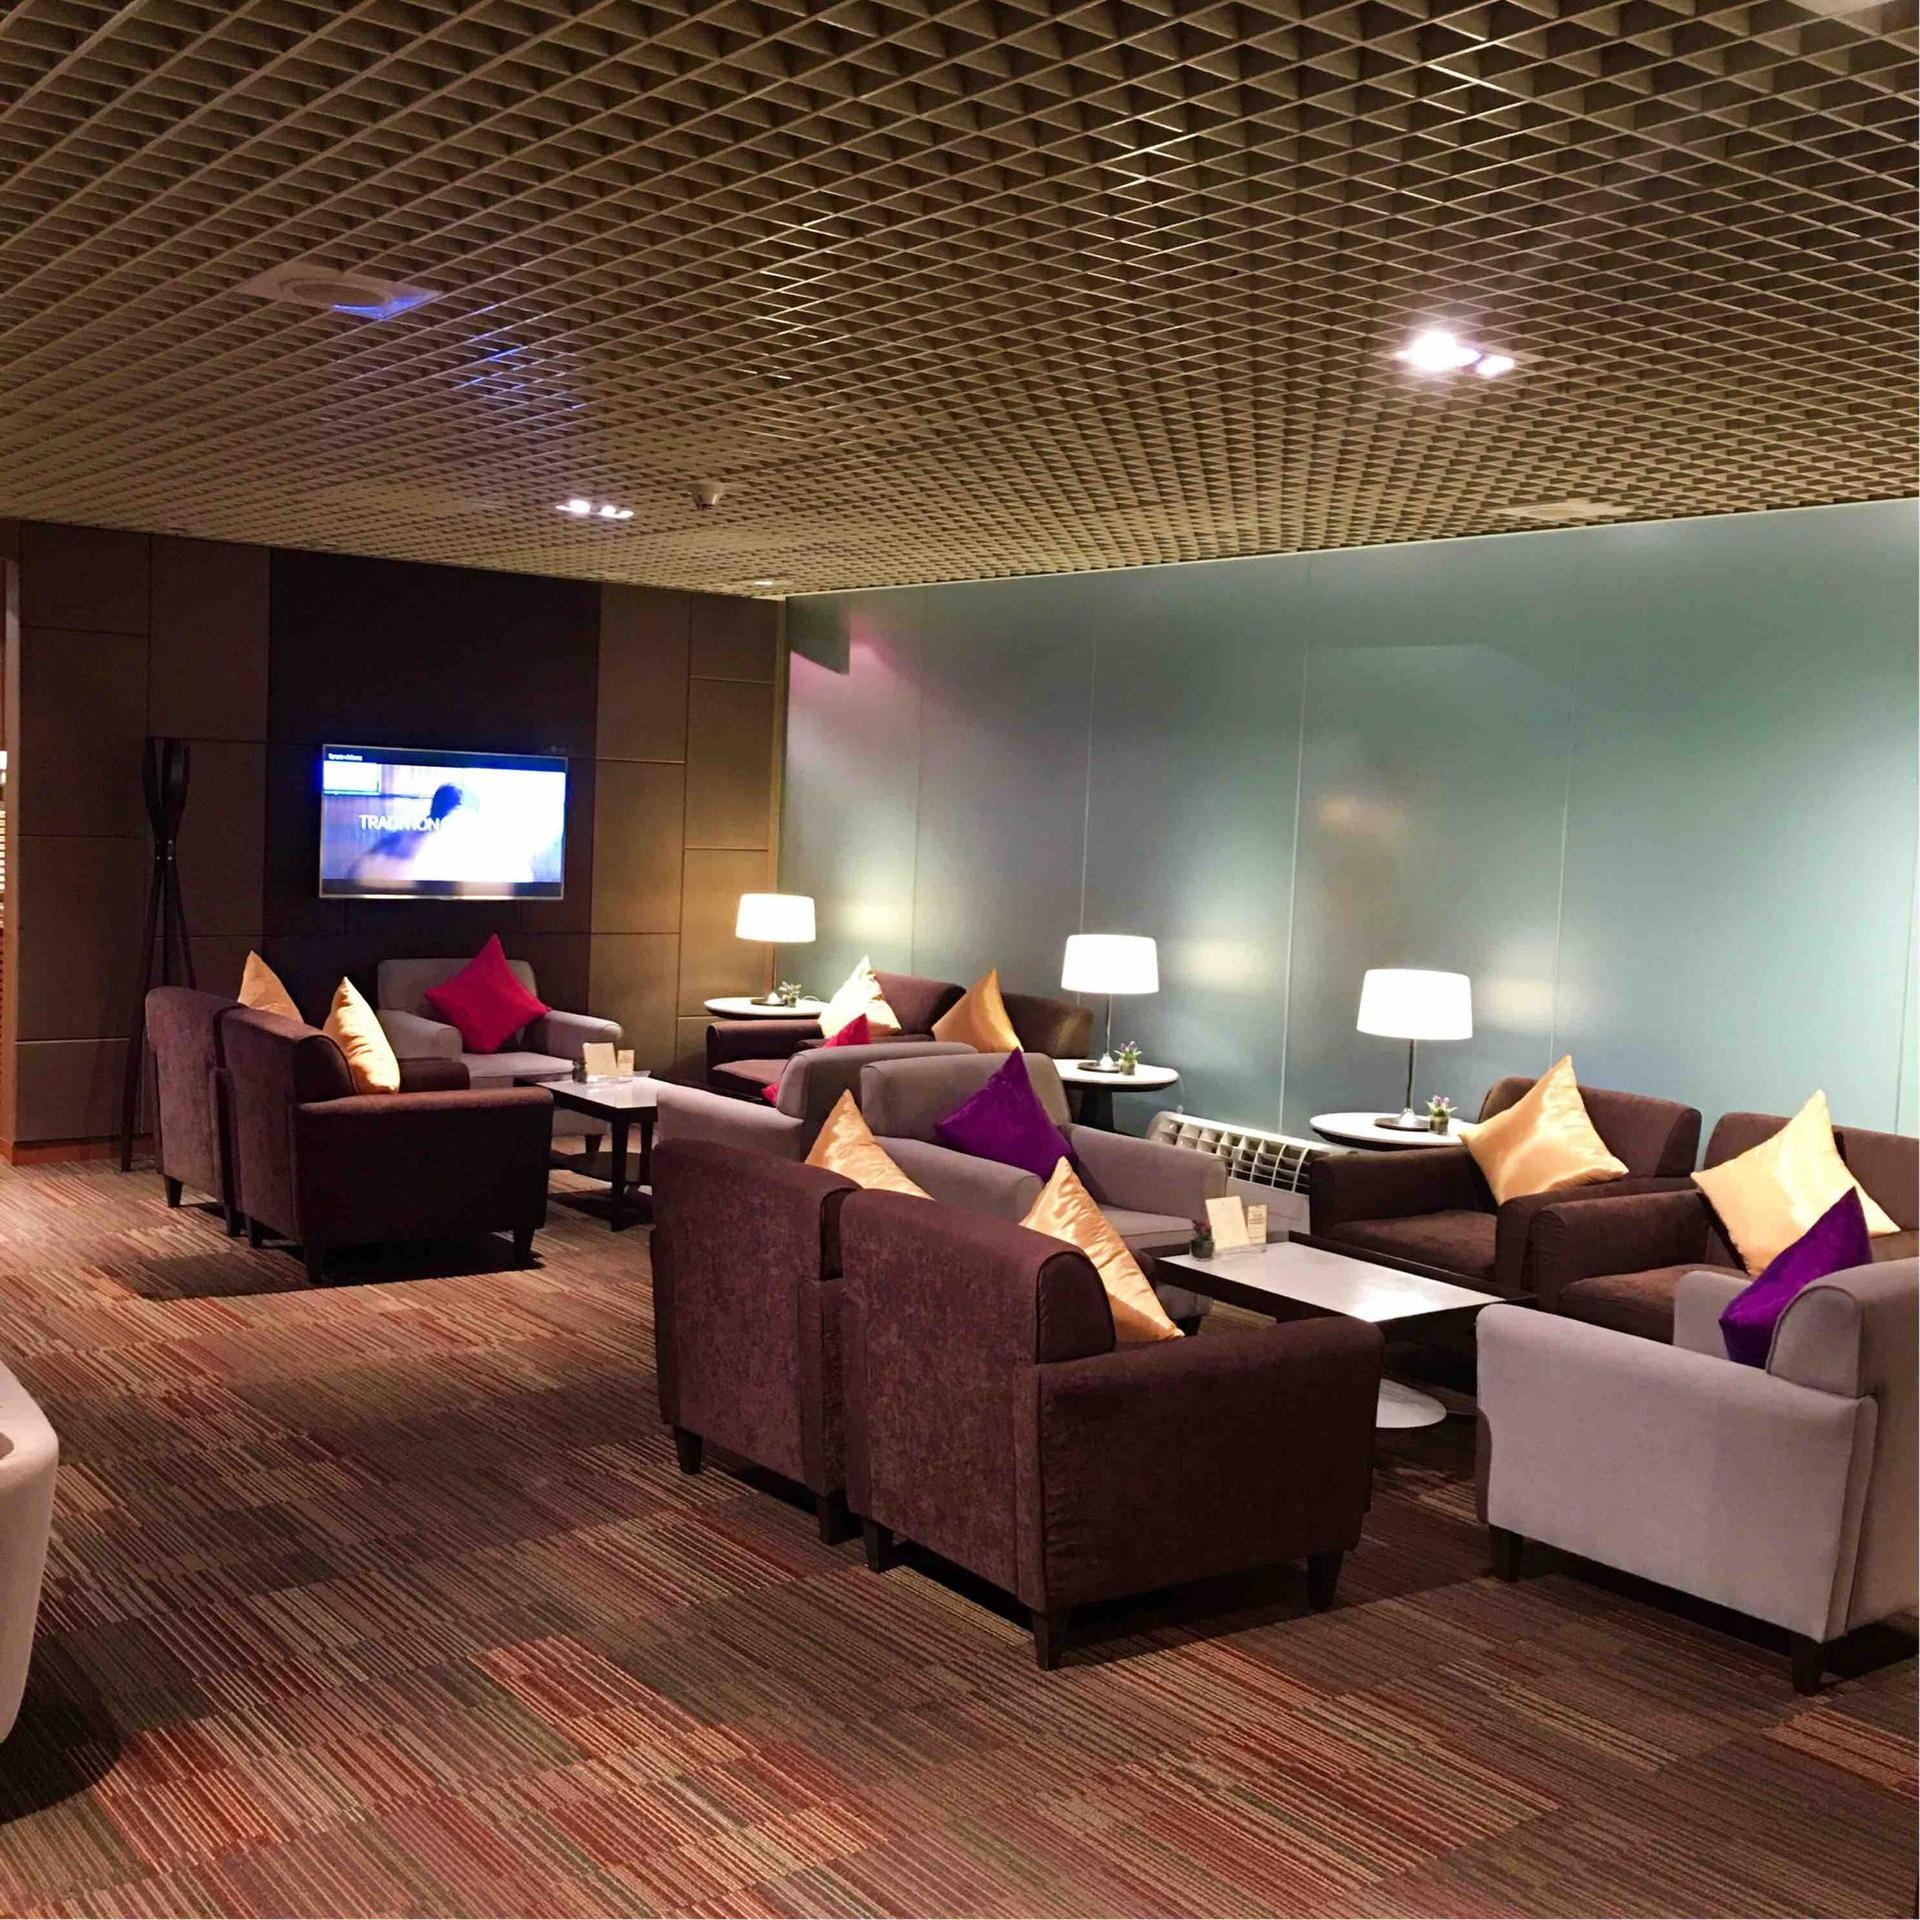 Thai Airways Royal First Class Lounge image 37 of 44